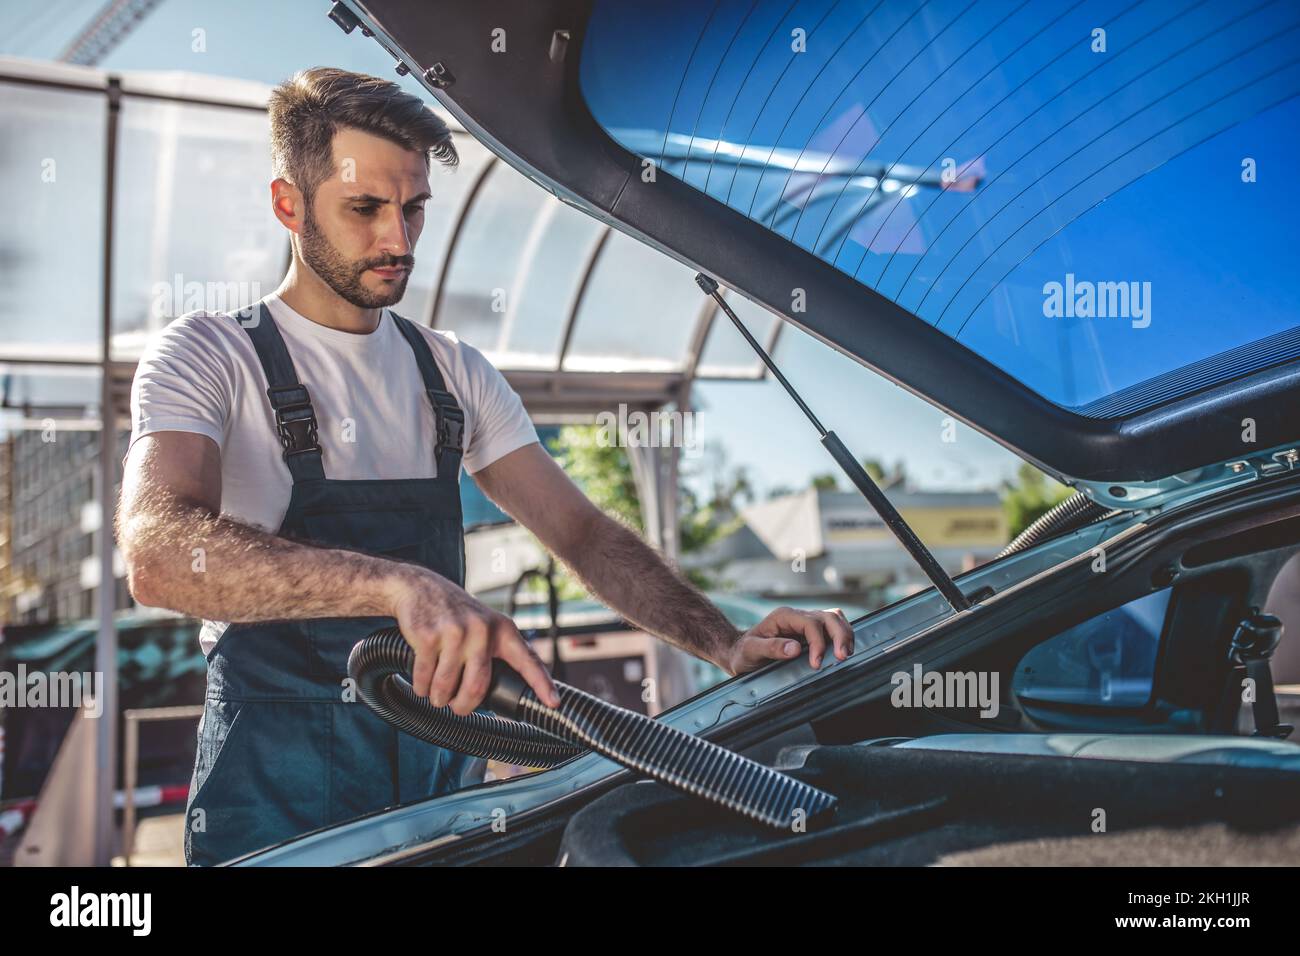 Experienced service station worker vacuuming the dirty automobile interior Stock Photo